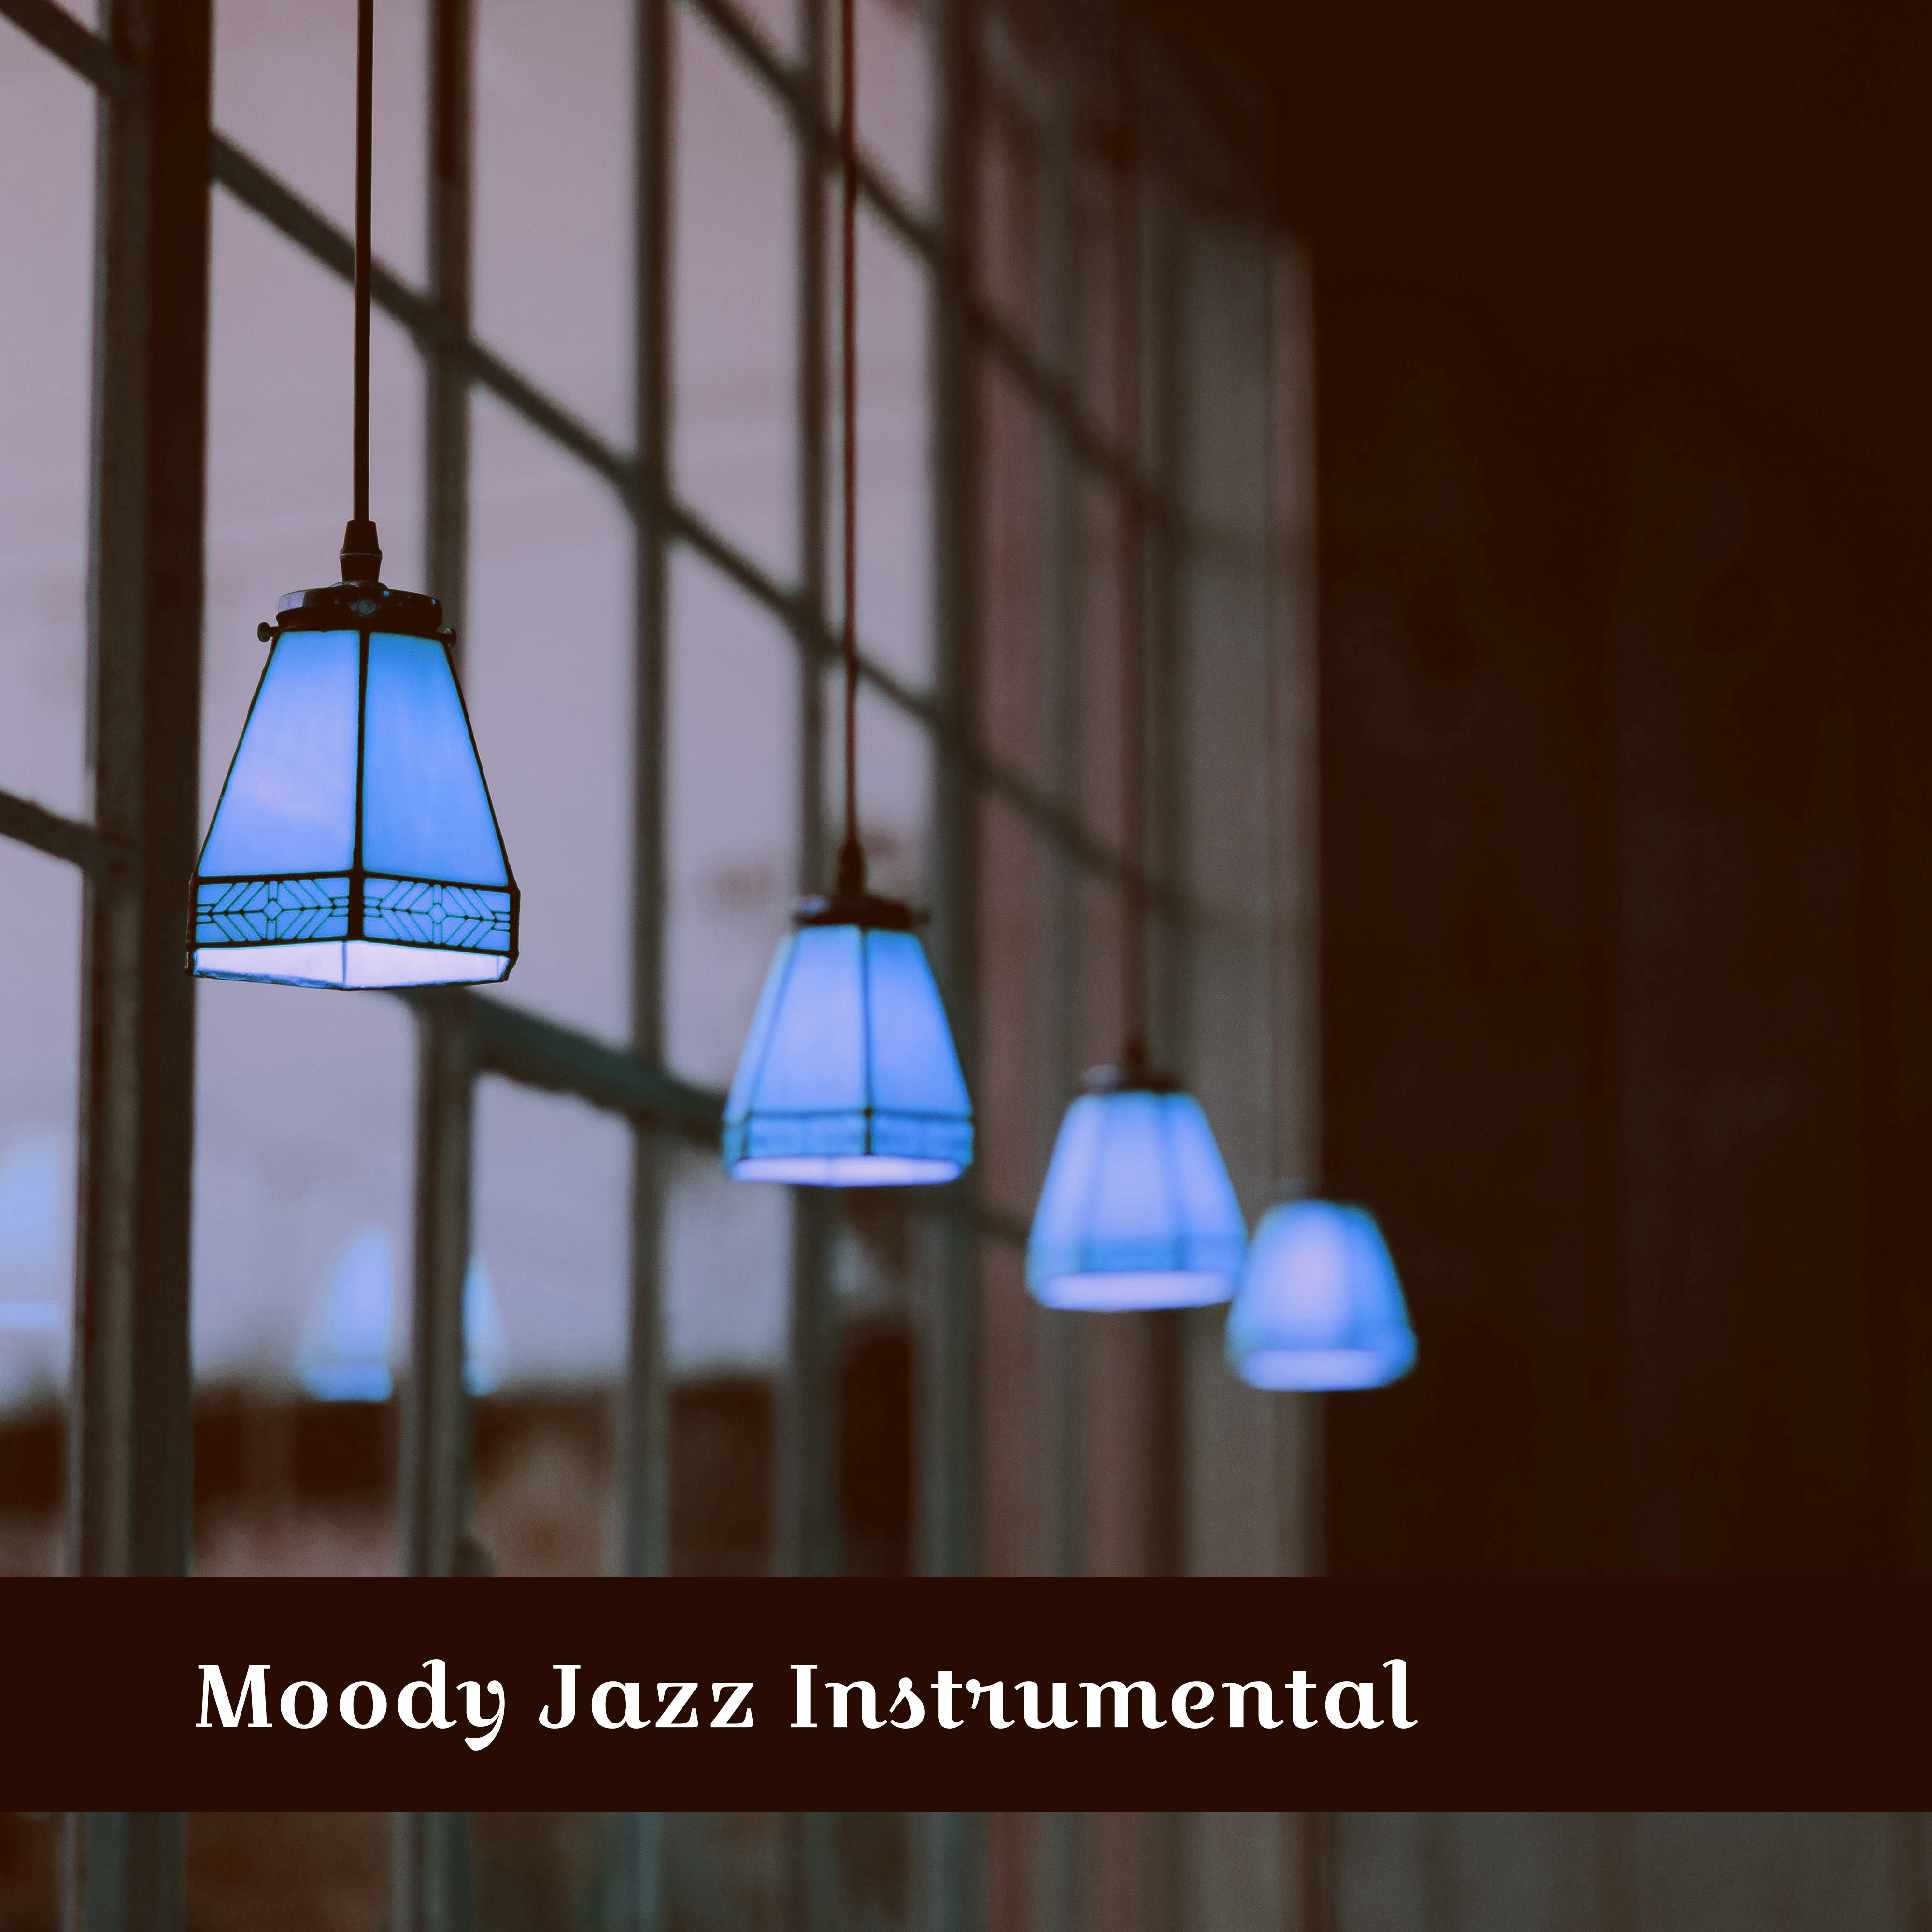 Moody Jazz Instrumental  Simple Piano Sounds, Gentle Jazz for Relax, Ambient Music